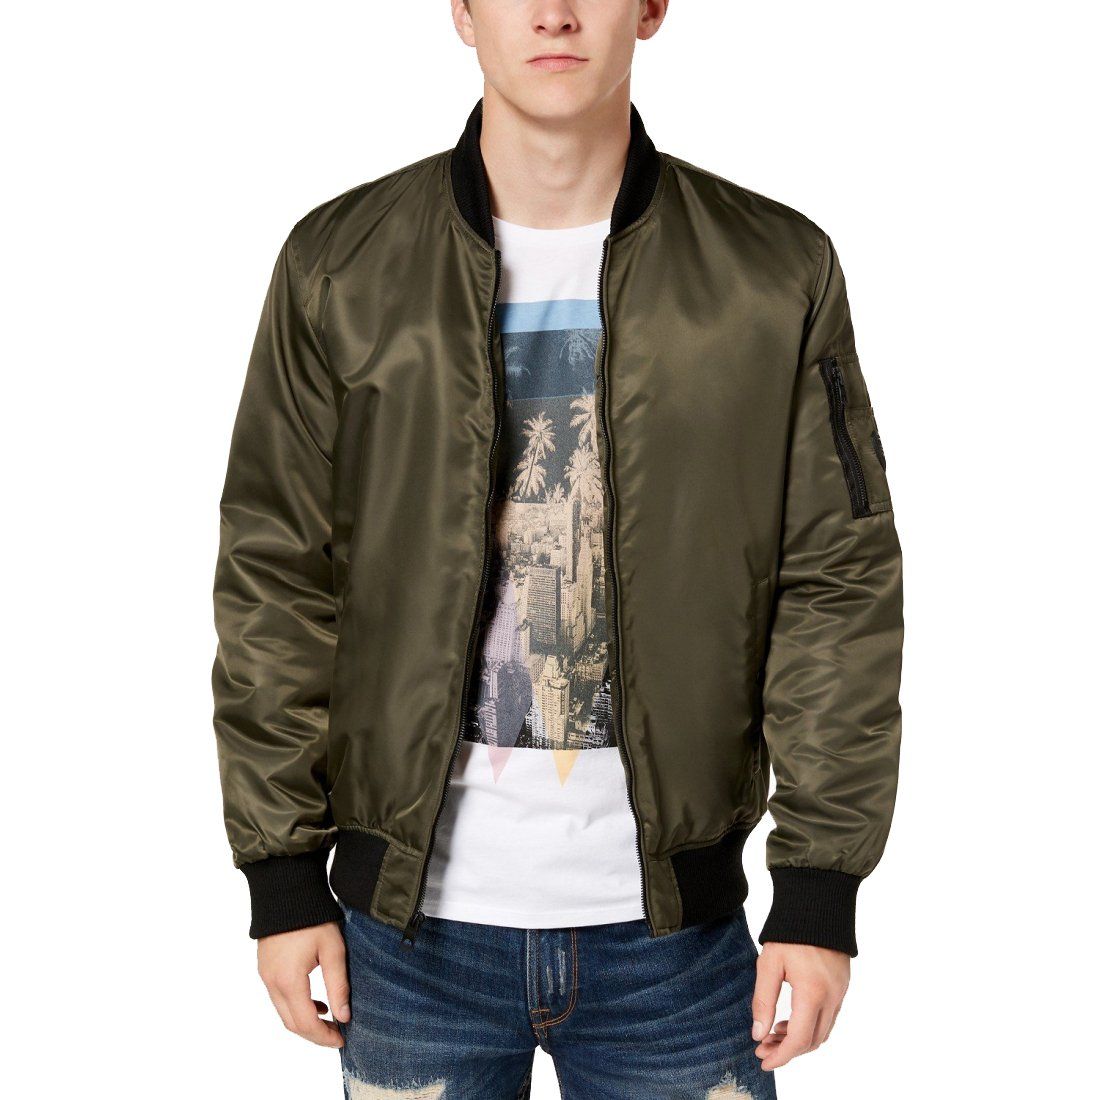 Guess - Blouson bomber 'Removable Hooded Inset' pour Hommes